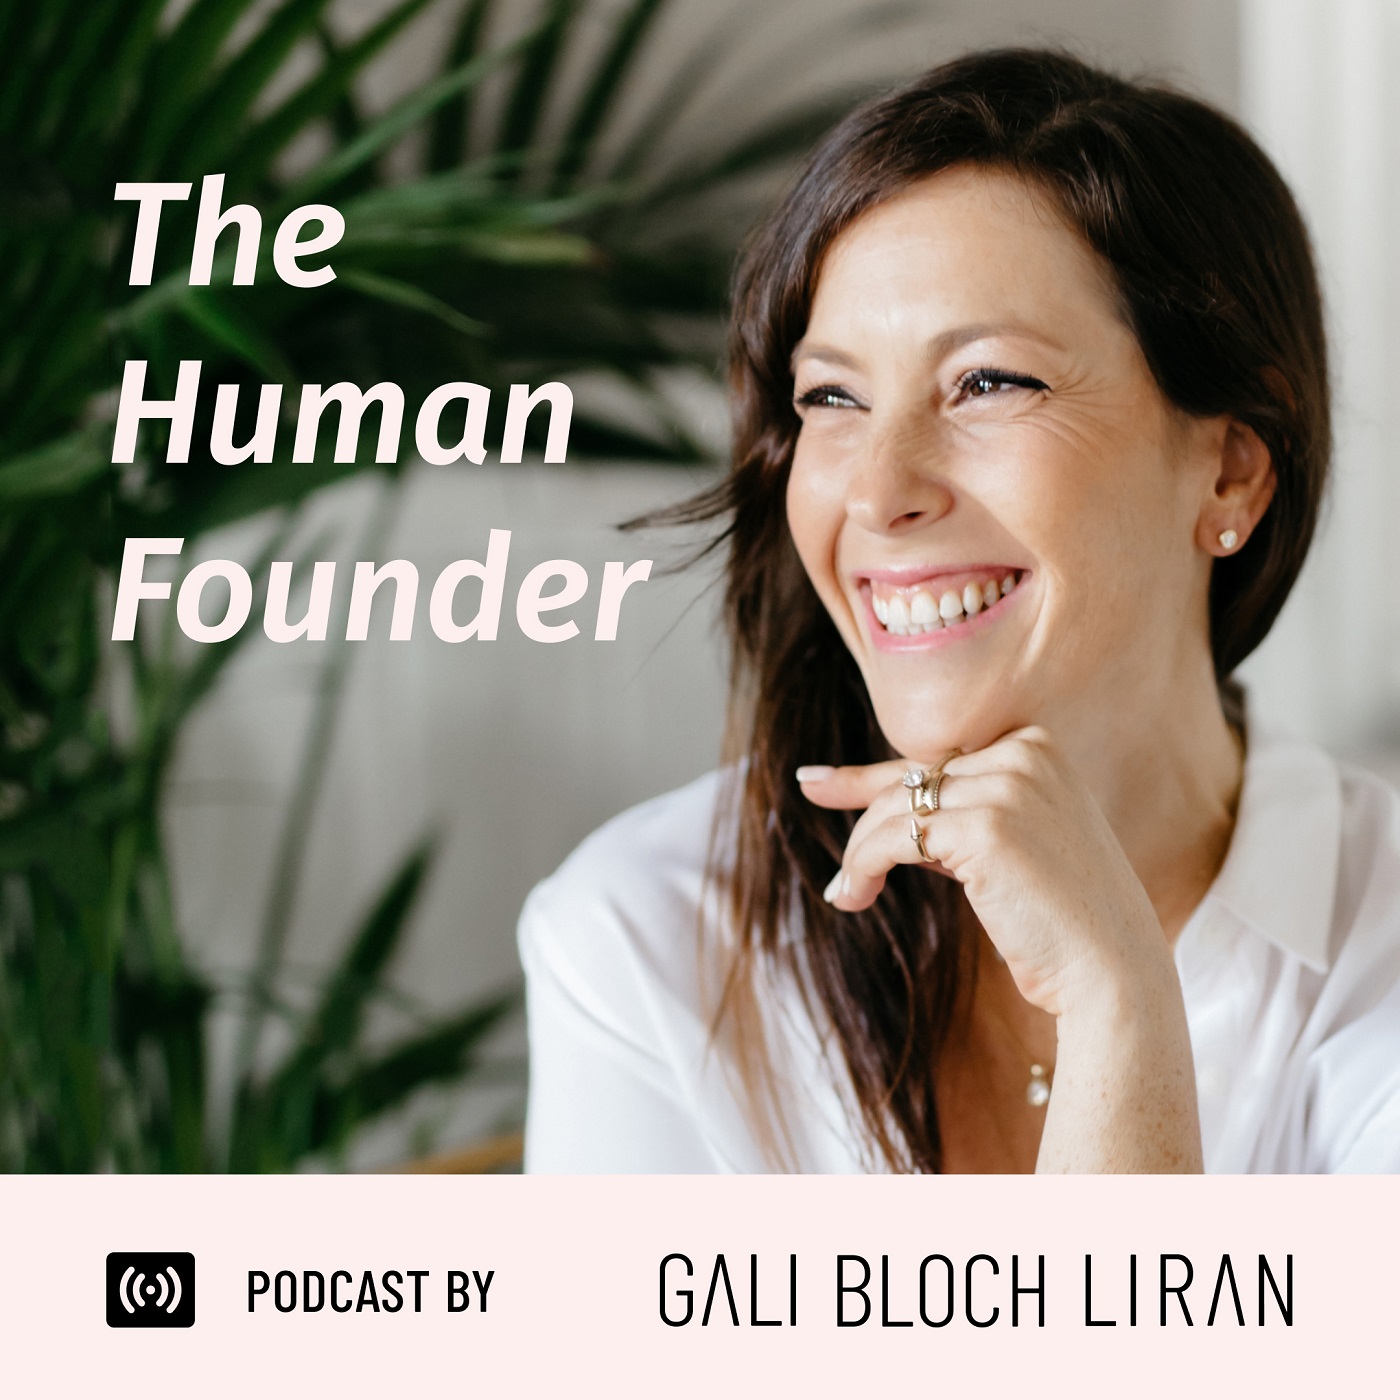 The Human Founder